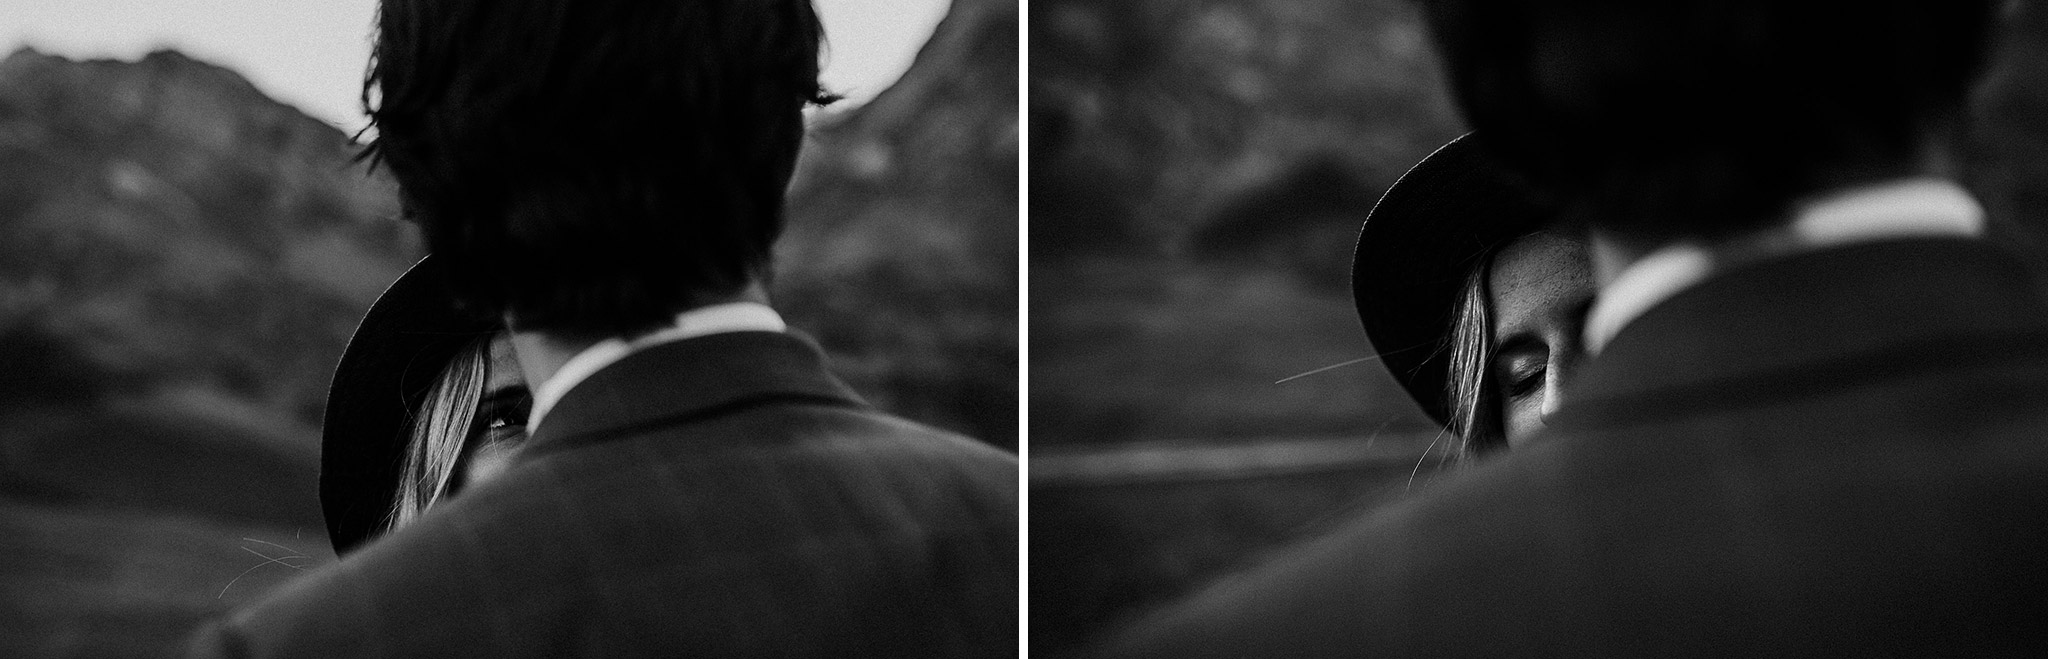 fine art and intimate wedding photography from Berlin